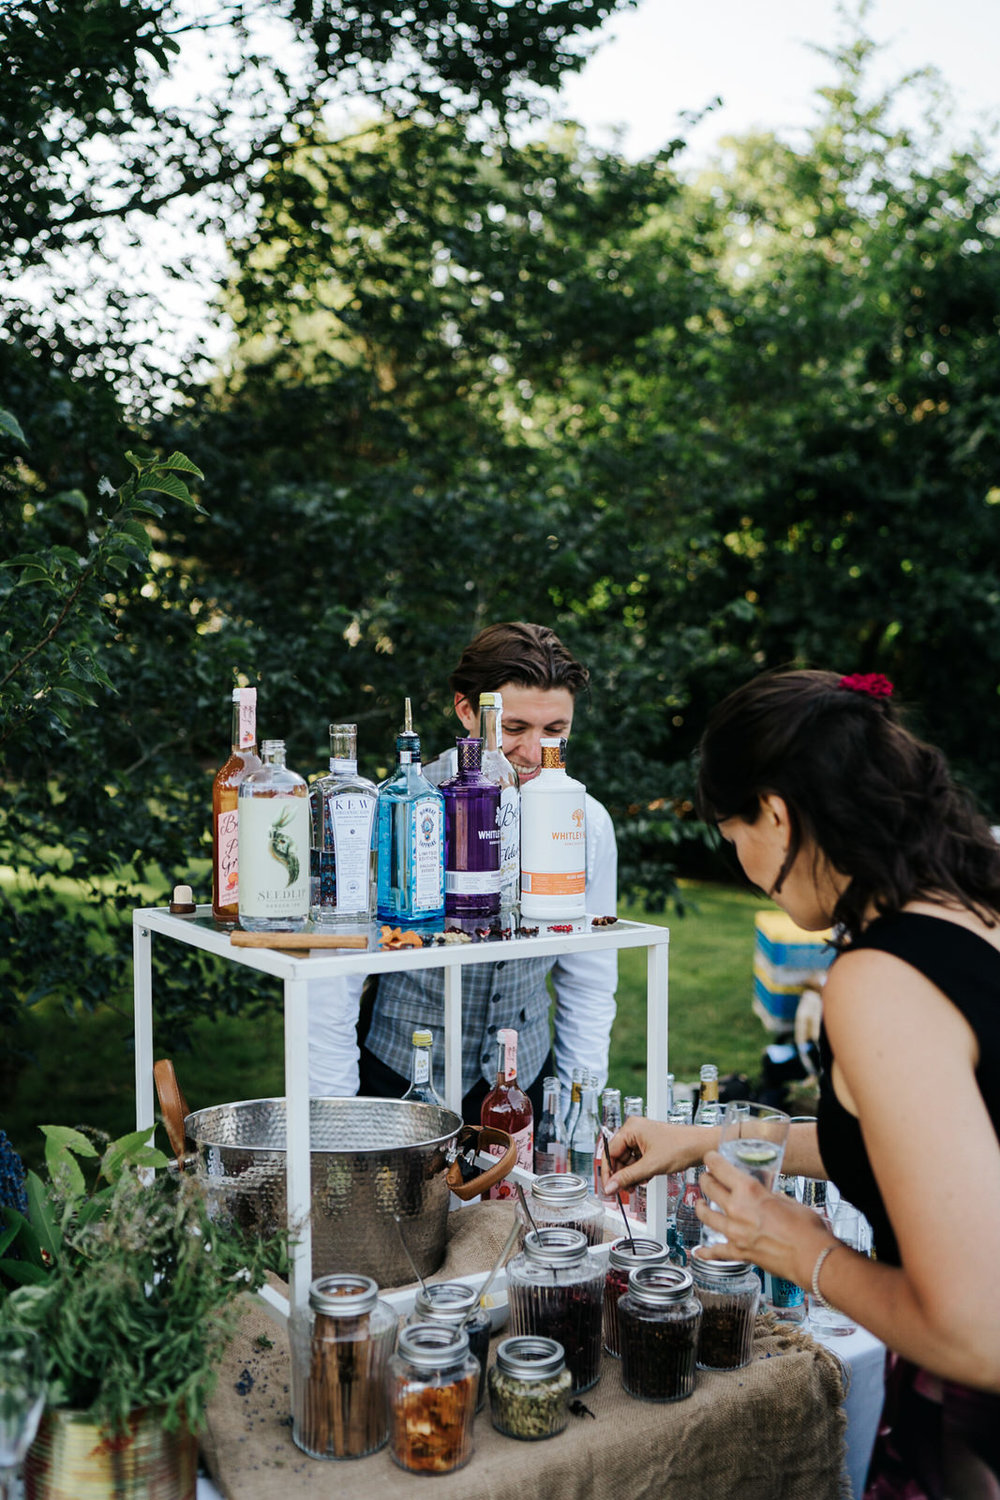  Guest prepares her own gin at pimp your gin stand during wedding drinks reception 